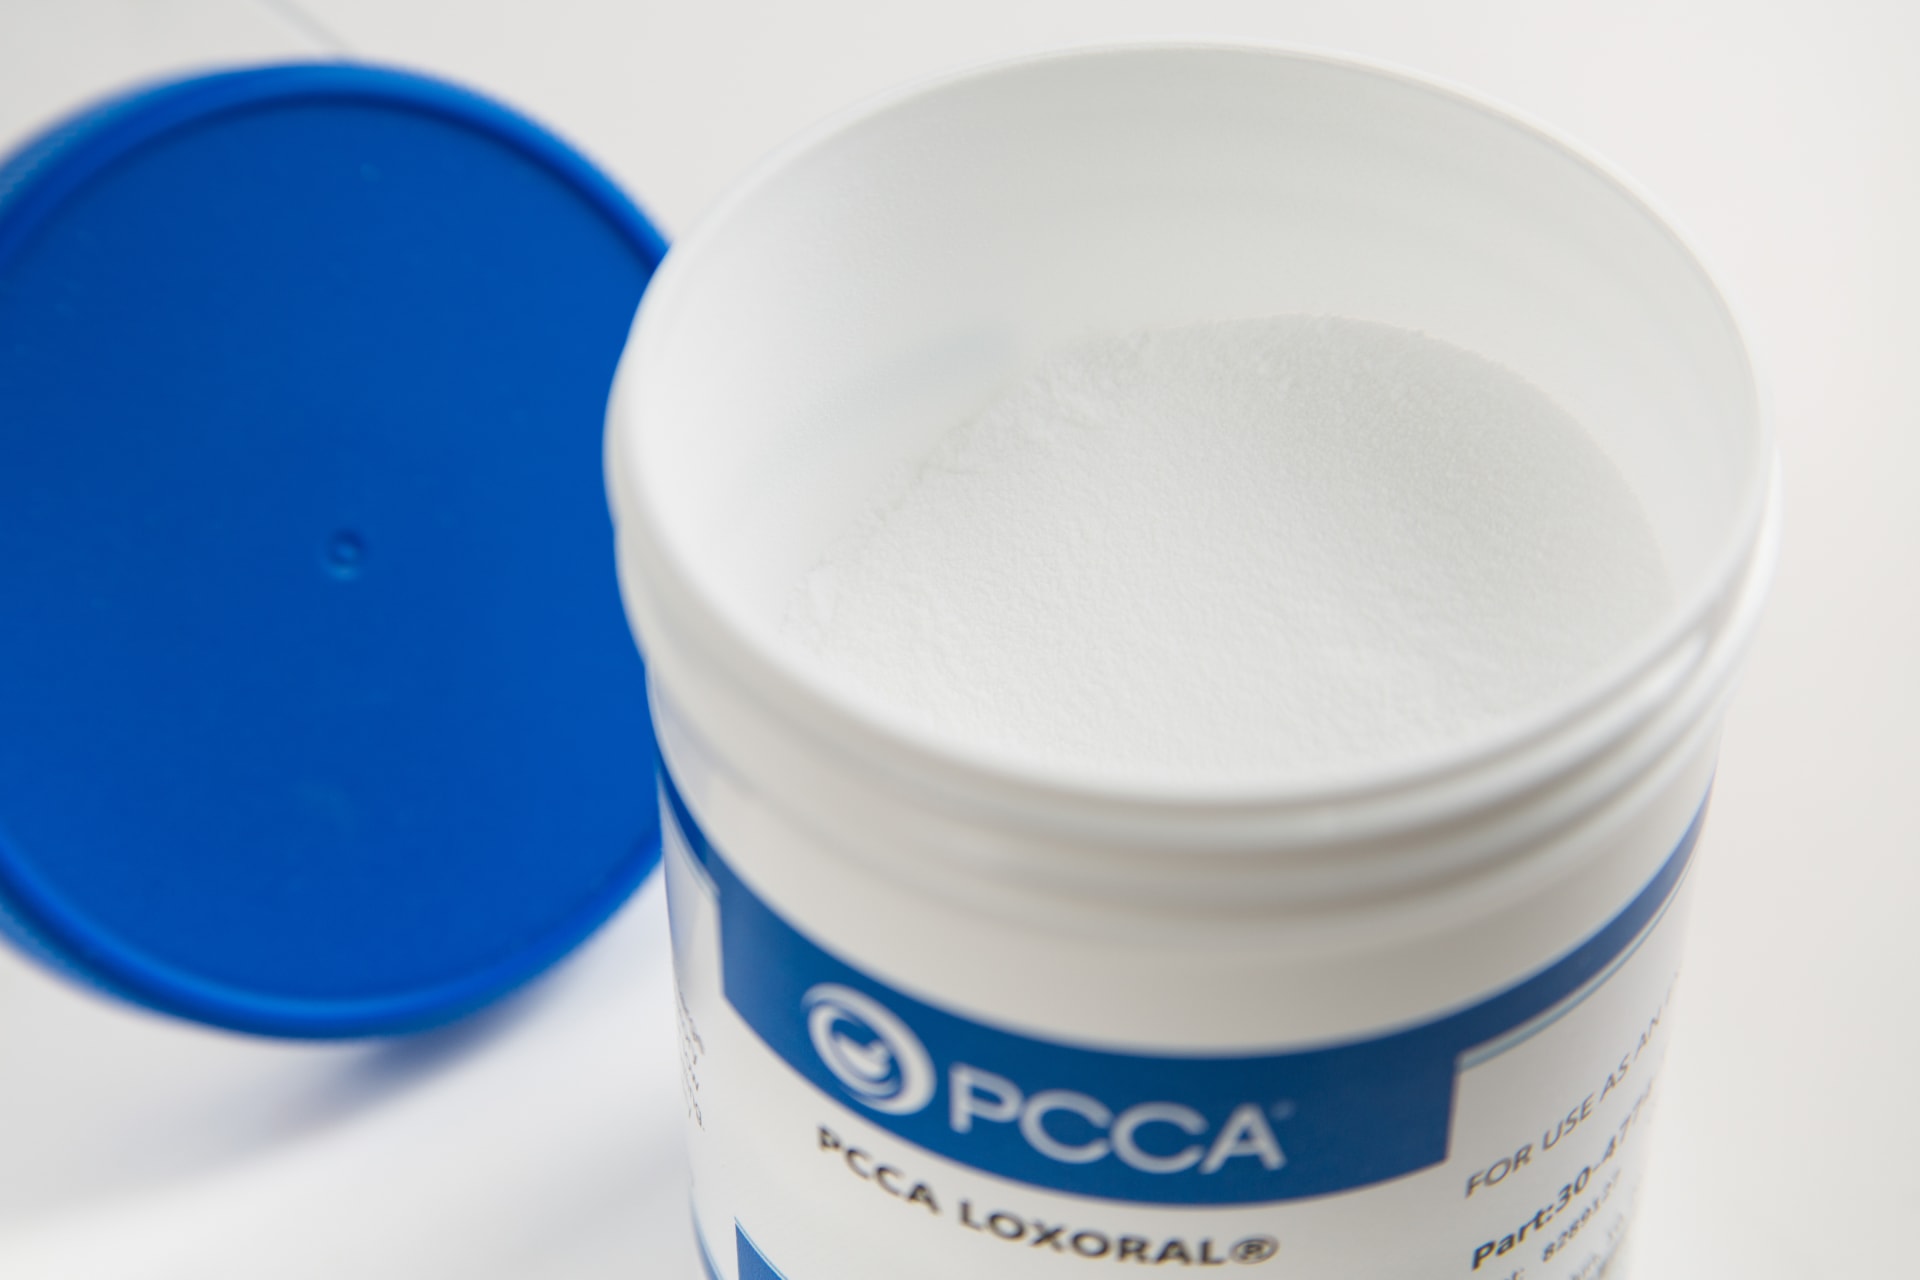 Canister of PCCA WO6 Anhydrous Topical Gel